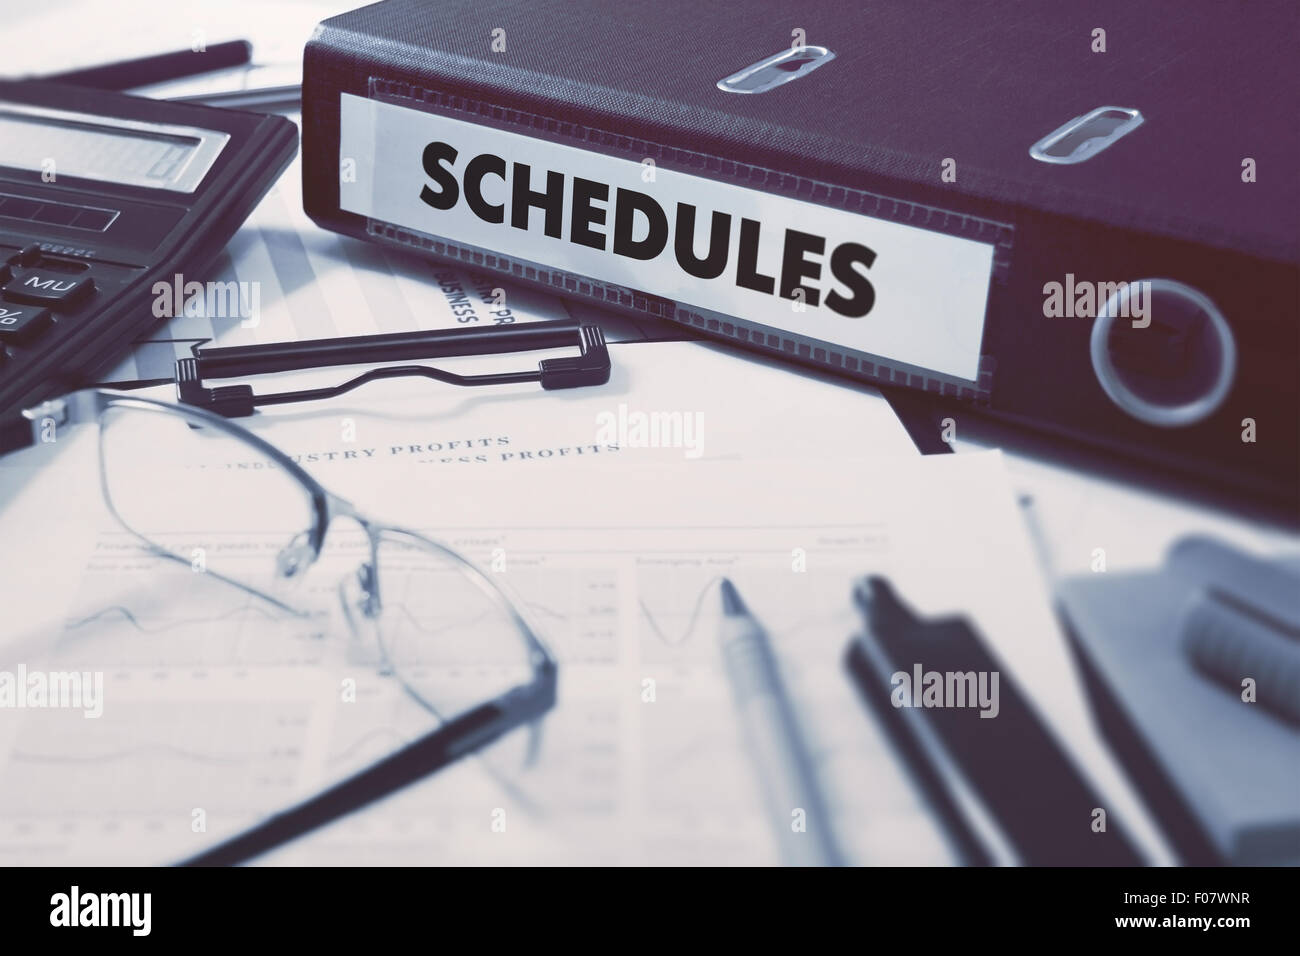 Schedules on Office Folder. Toned Image. Stock Photo